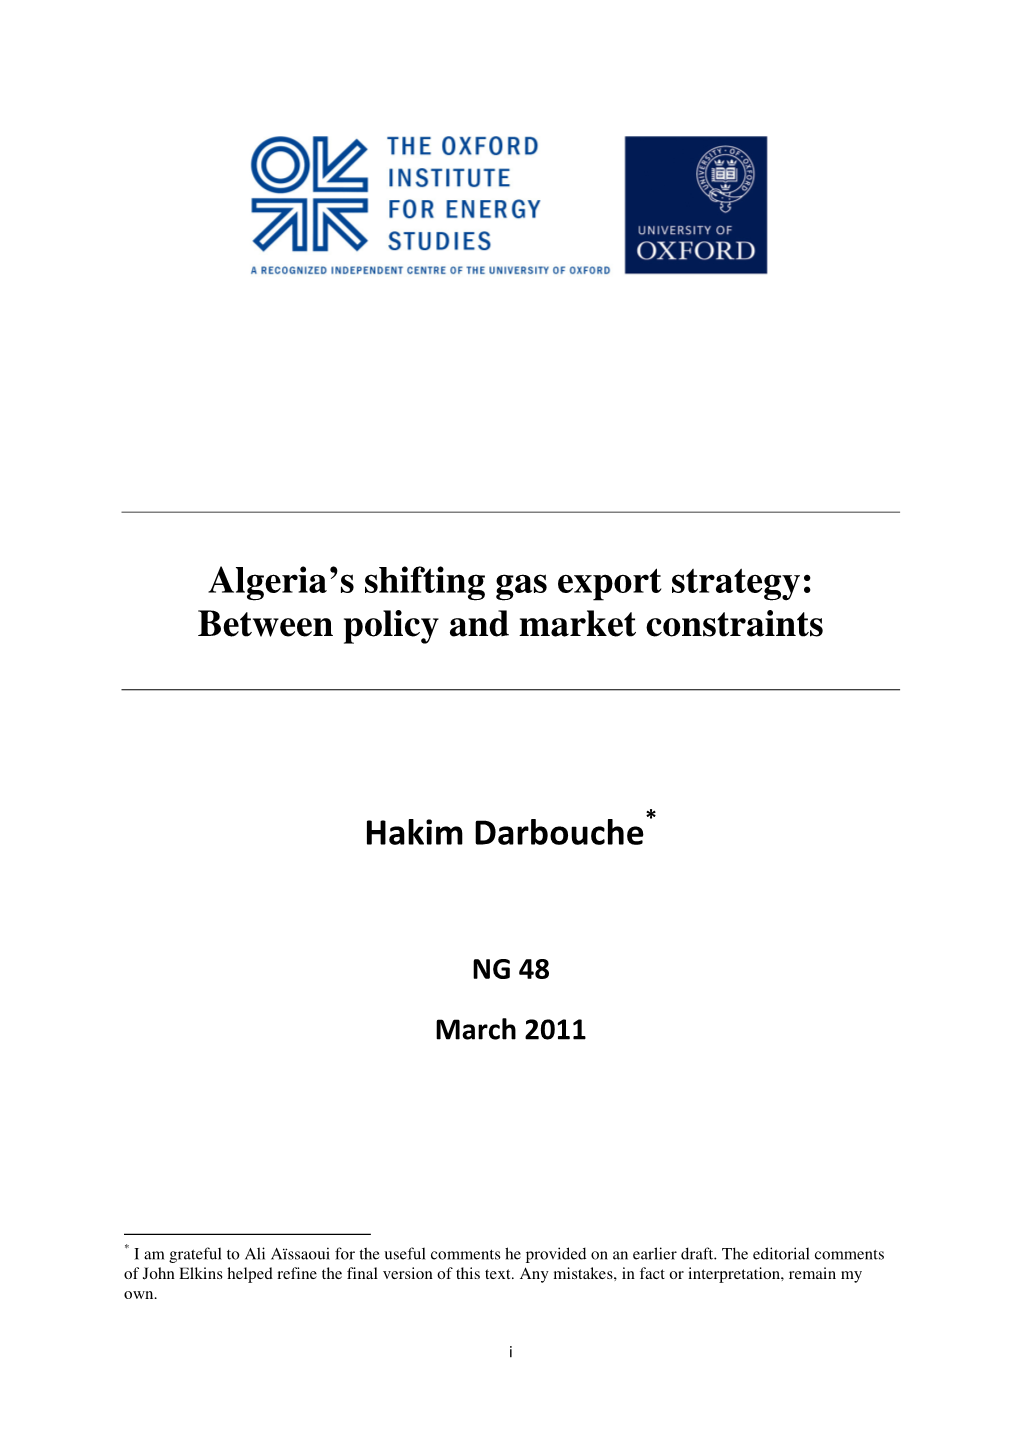 Algeria's Shifting Gas Export Strategy: Between Policy and Market